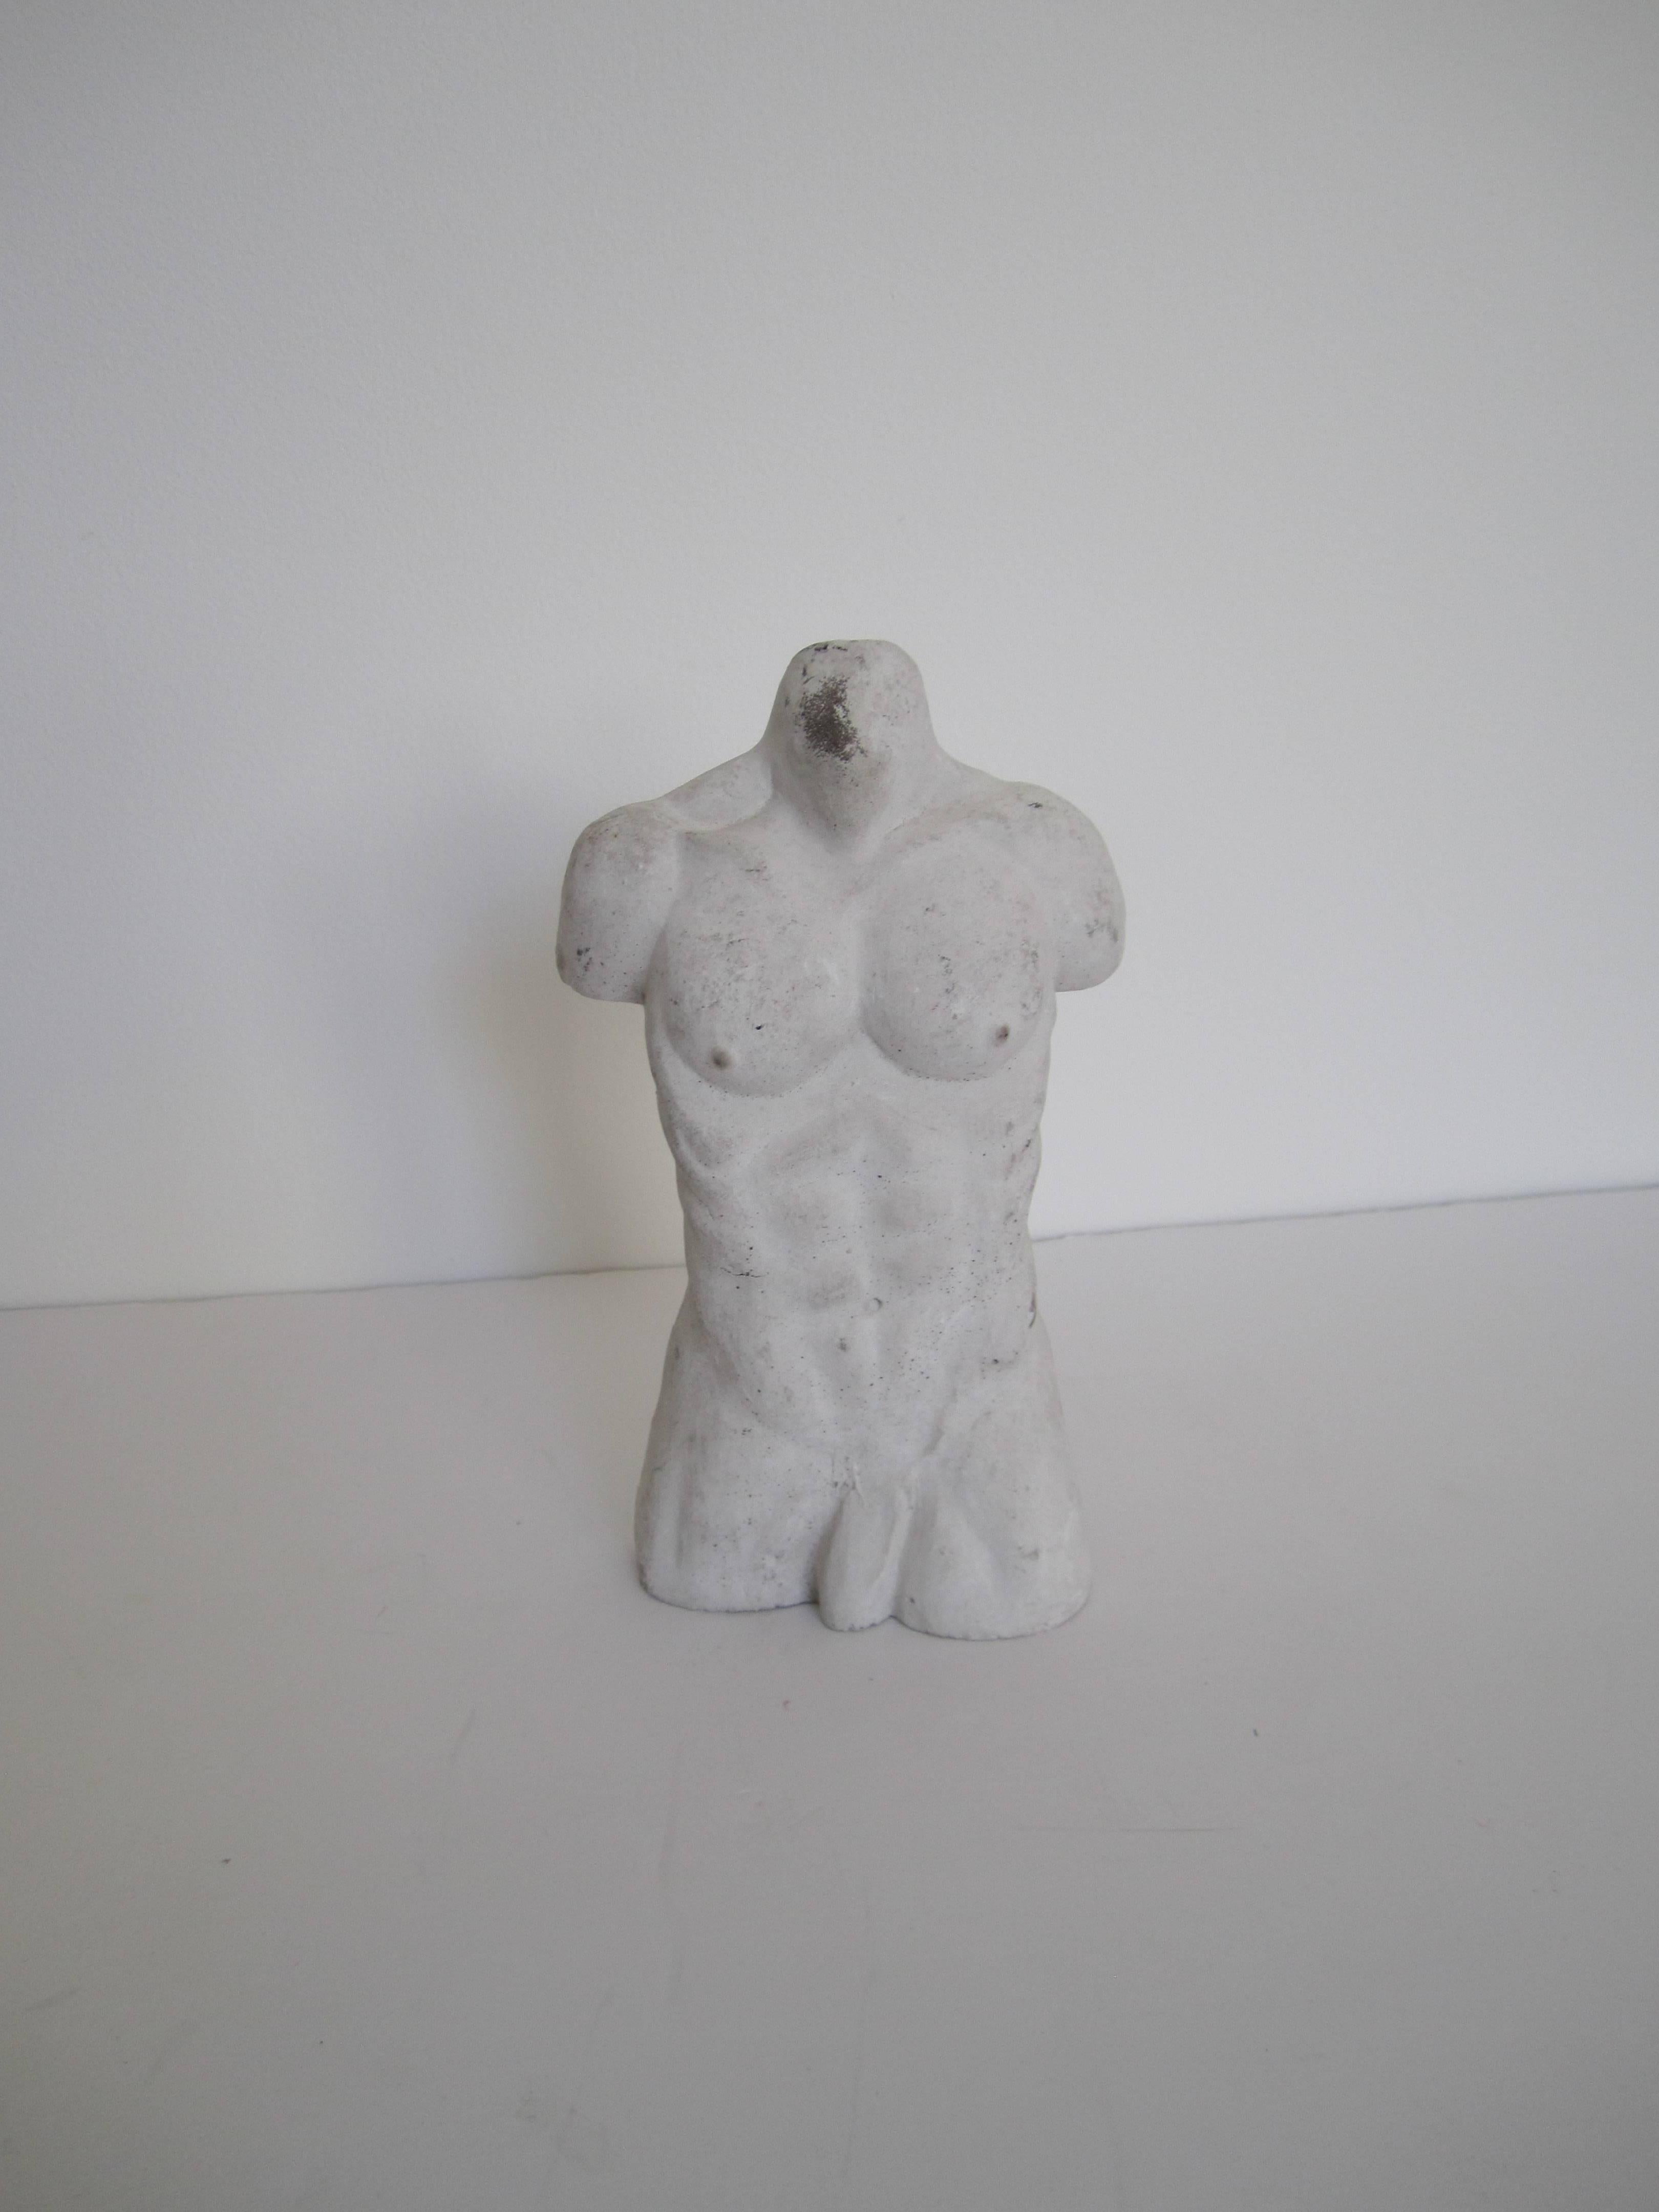 A decorative male torso sculpture piece. Sculpture is metal with a white plaster overlay. 

Measures: 8